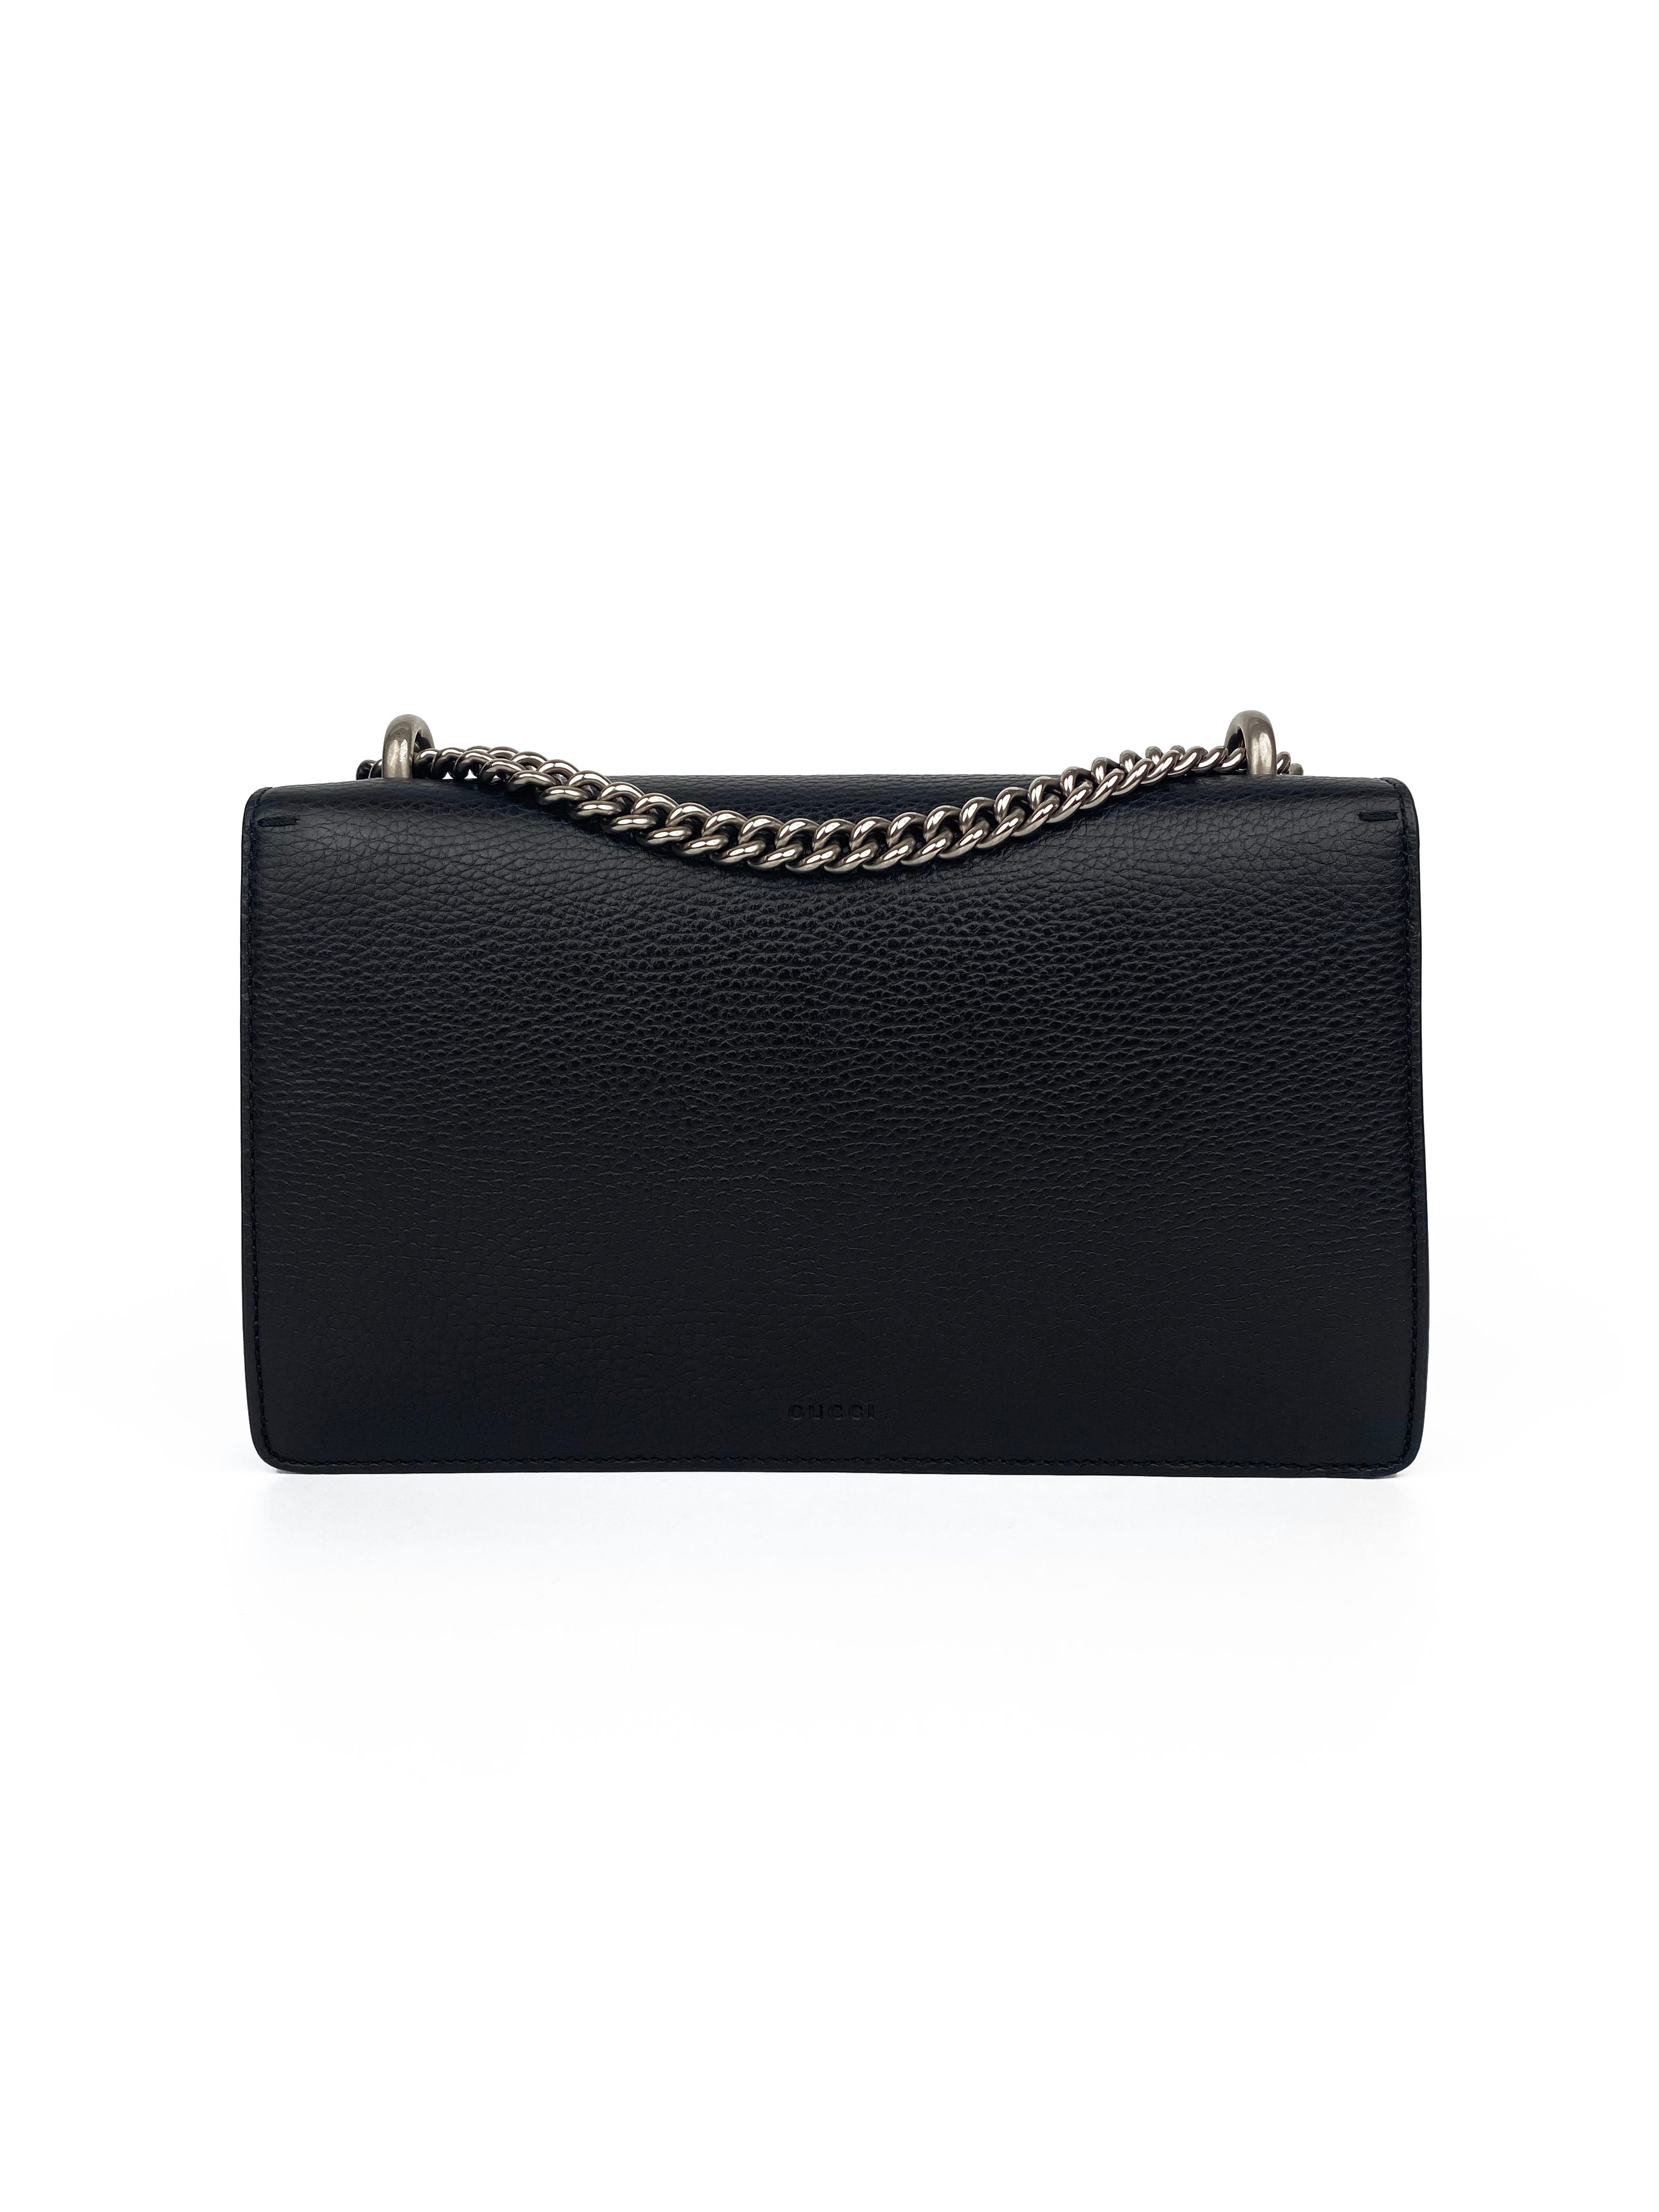 Chain Shoulder & Tote Bags for Women | GUCCI® UK | Small shoulder bag, Bags,  Chain strap bag